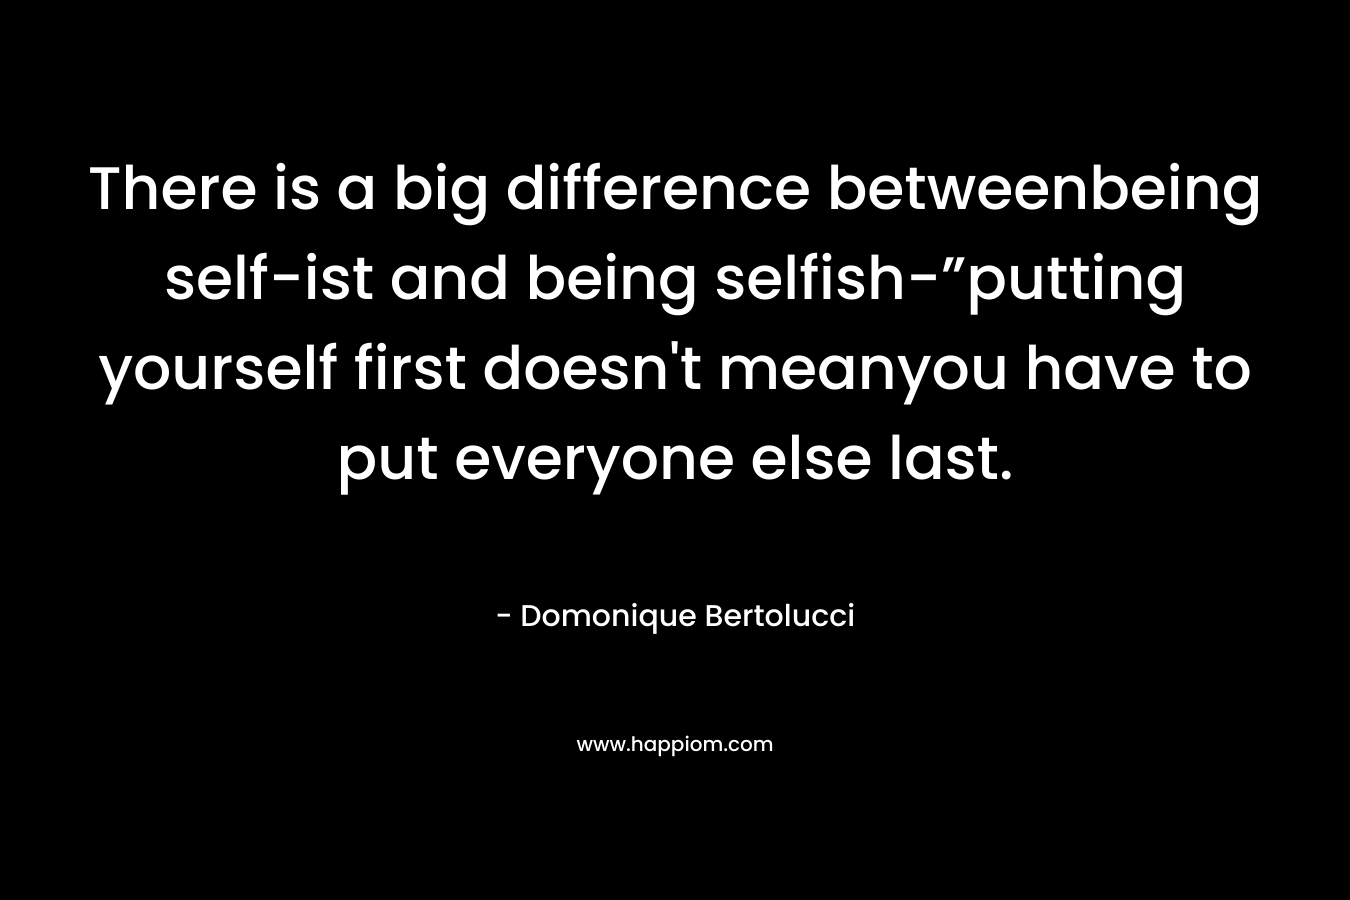 There is a big difference betweenbeing self-ist and being selfish-”putting yourself first doesn’t meanyou have to put everyone else last. – Domonique Bertolucci